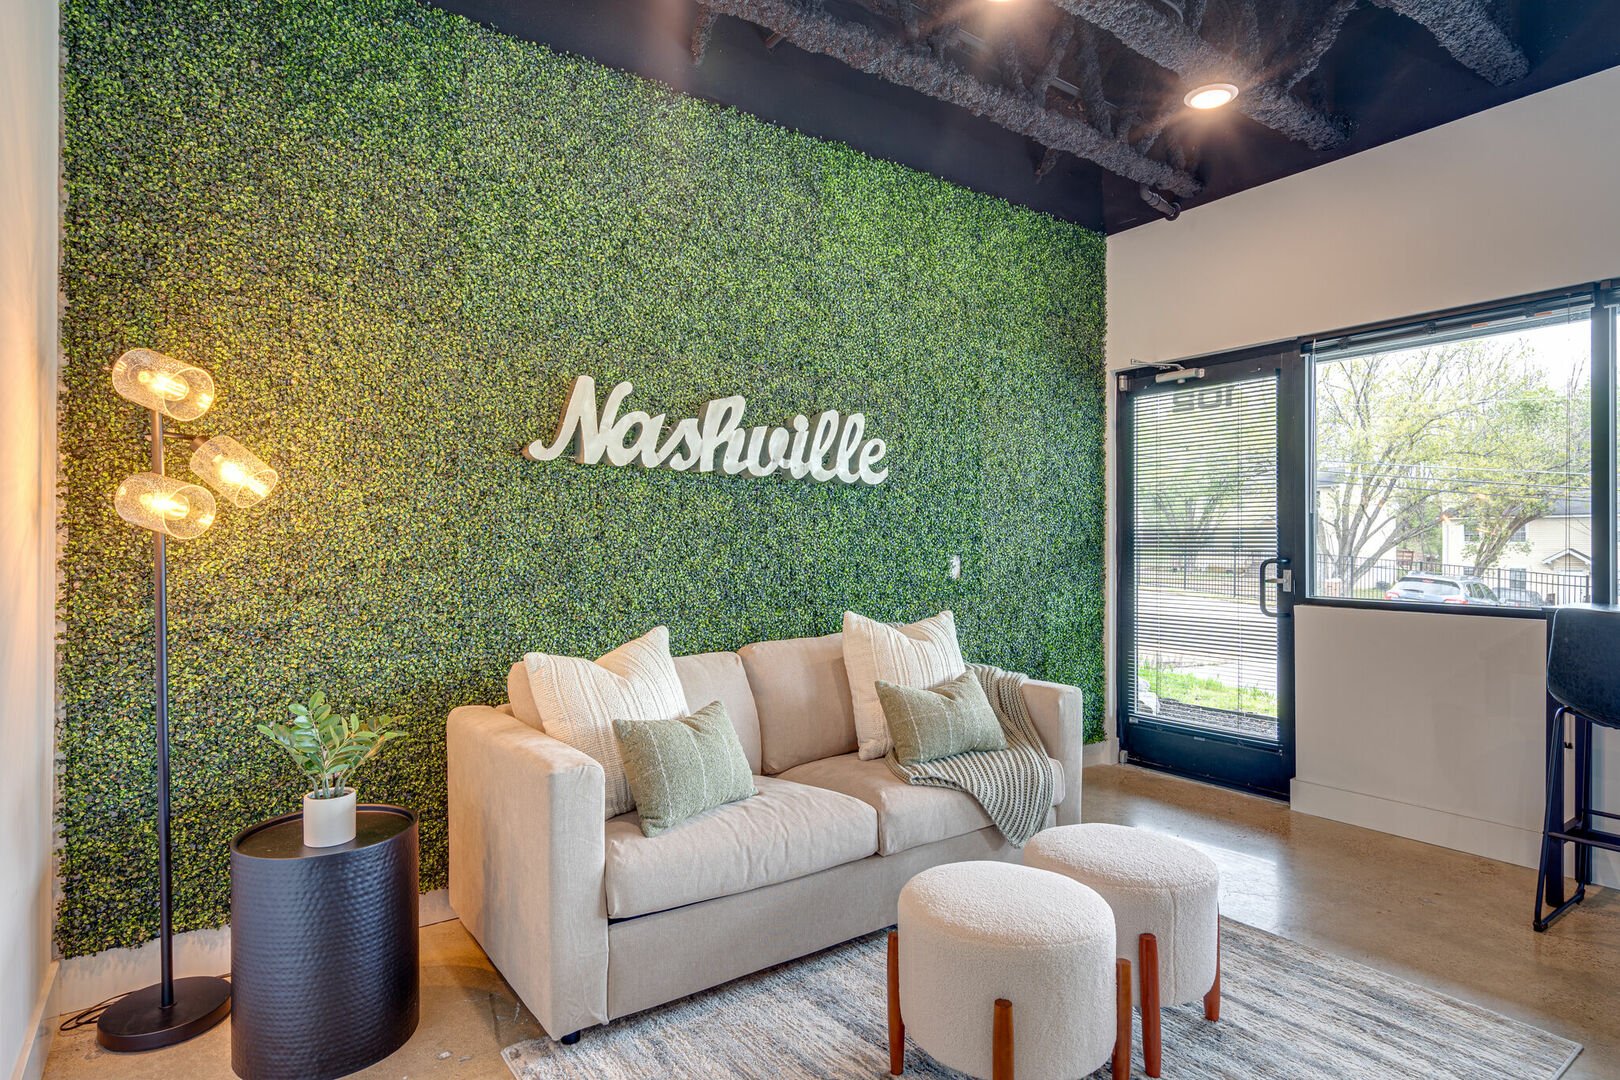 Light and Bright living space featuring Nashville themed designer furnishings!